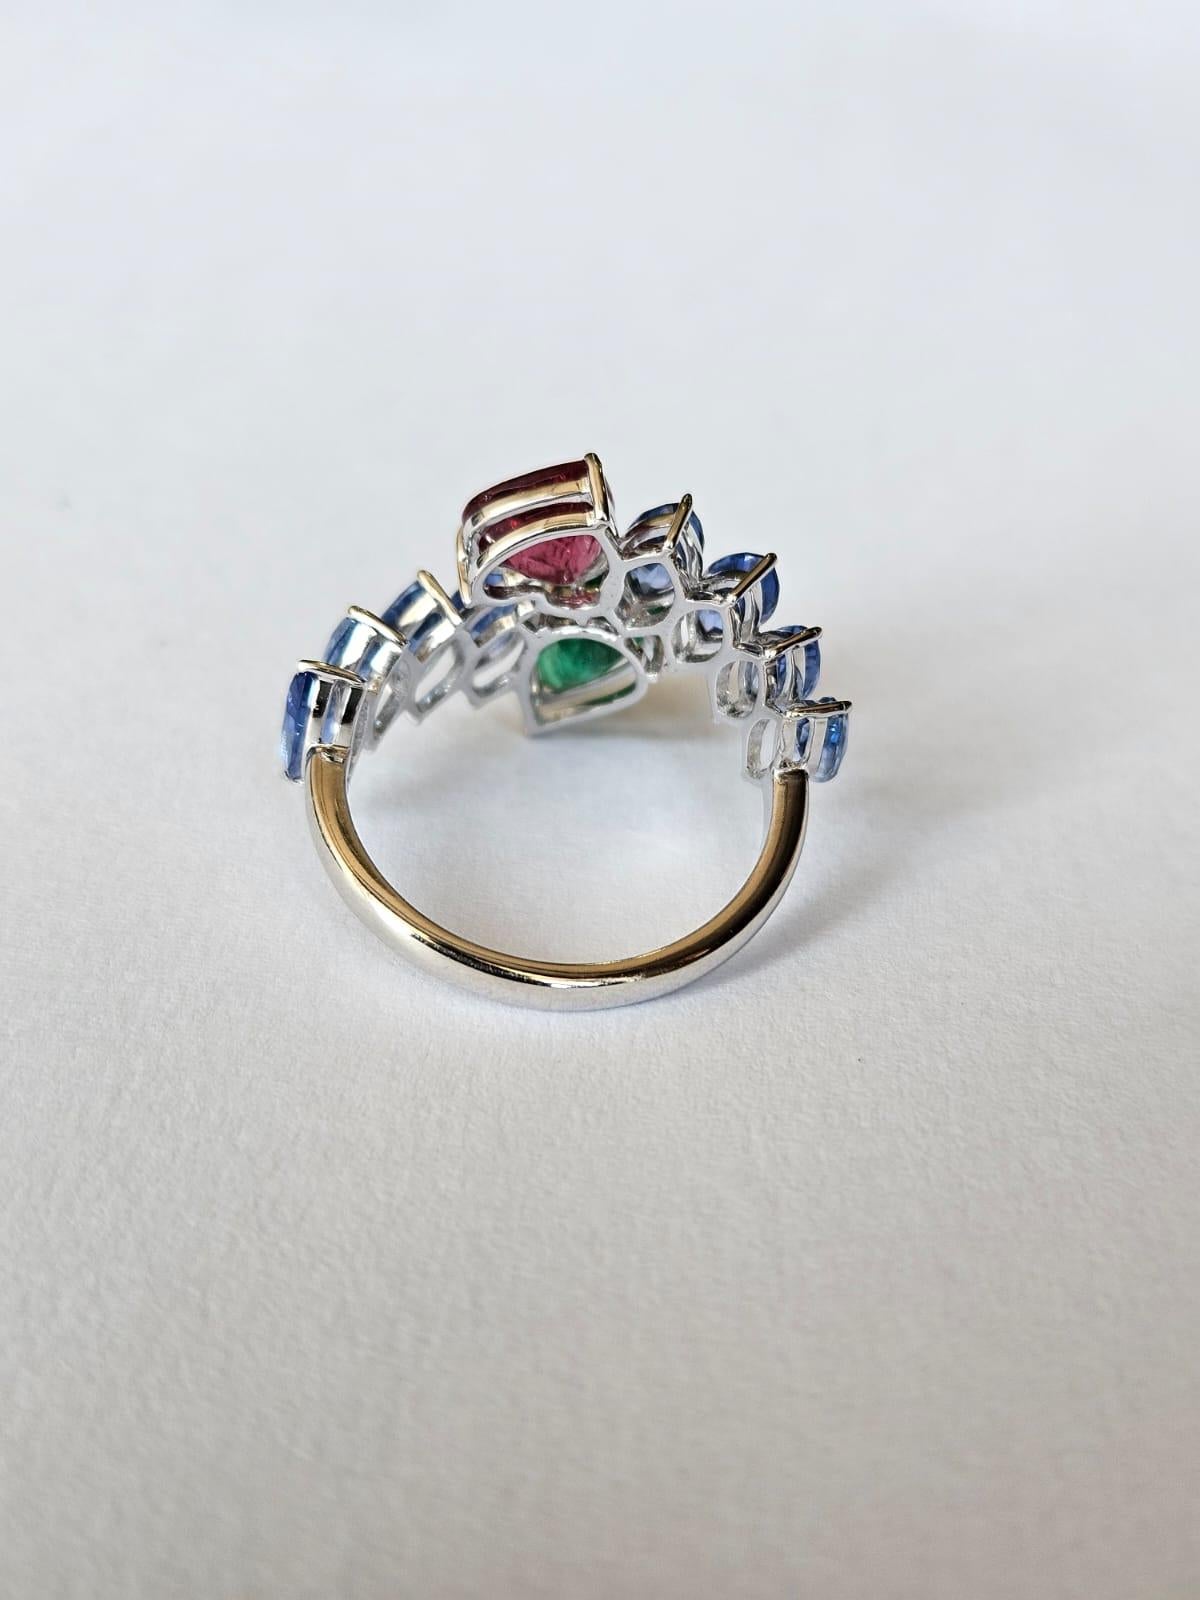 Women's or Men's Set in 18K White Gold, 3.44 carats Blue Sapphire, Emerald & Tourmaline Band Ring For Sale